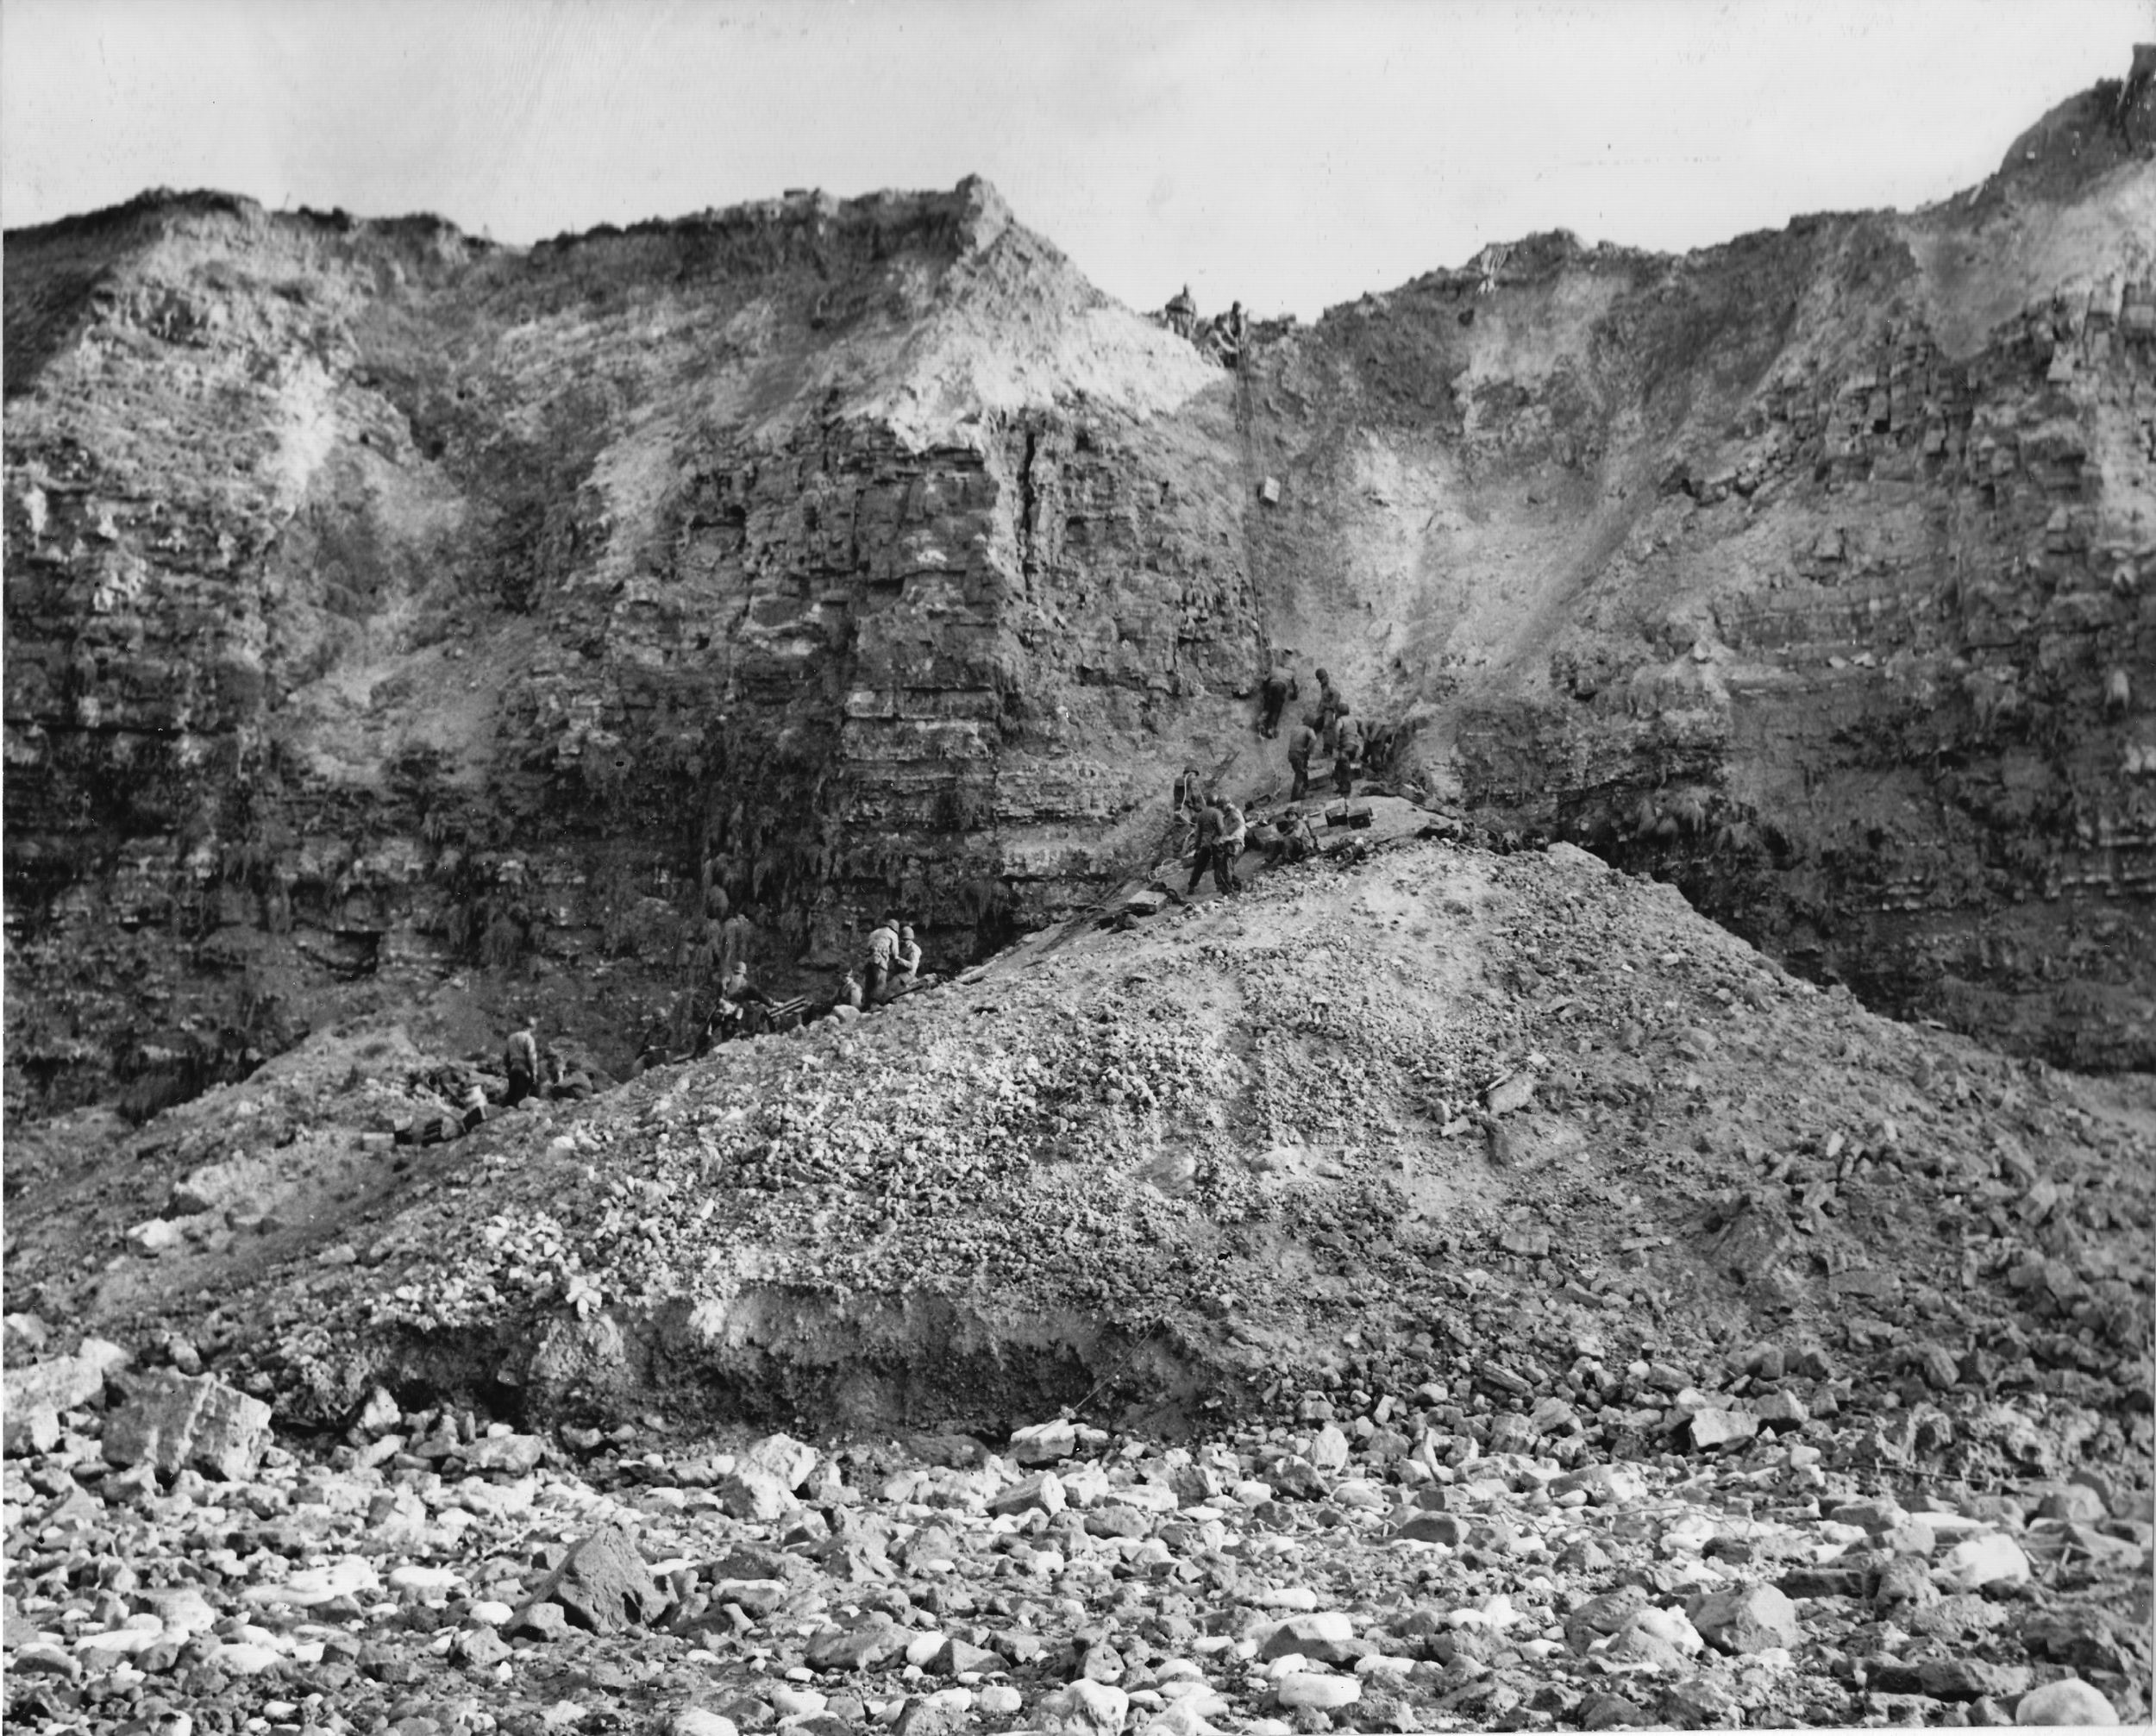 Using a mound of rubble created by shelling that made the initial climb during the attack somewhat shorter, Rangers raise supplies to the top of Pointe du Hoc. 